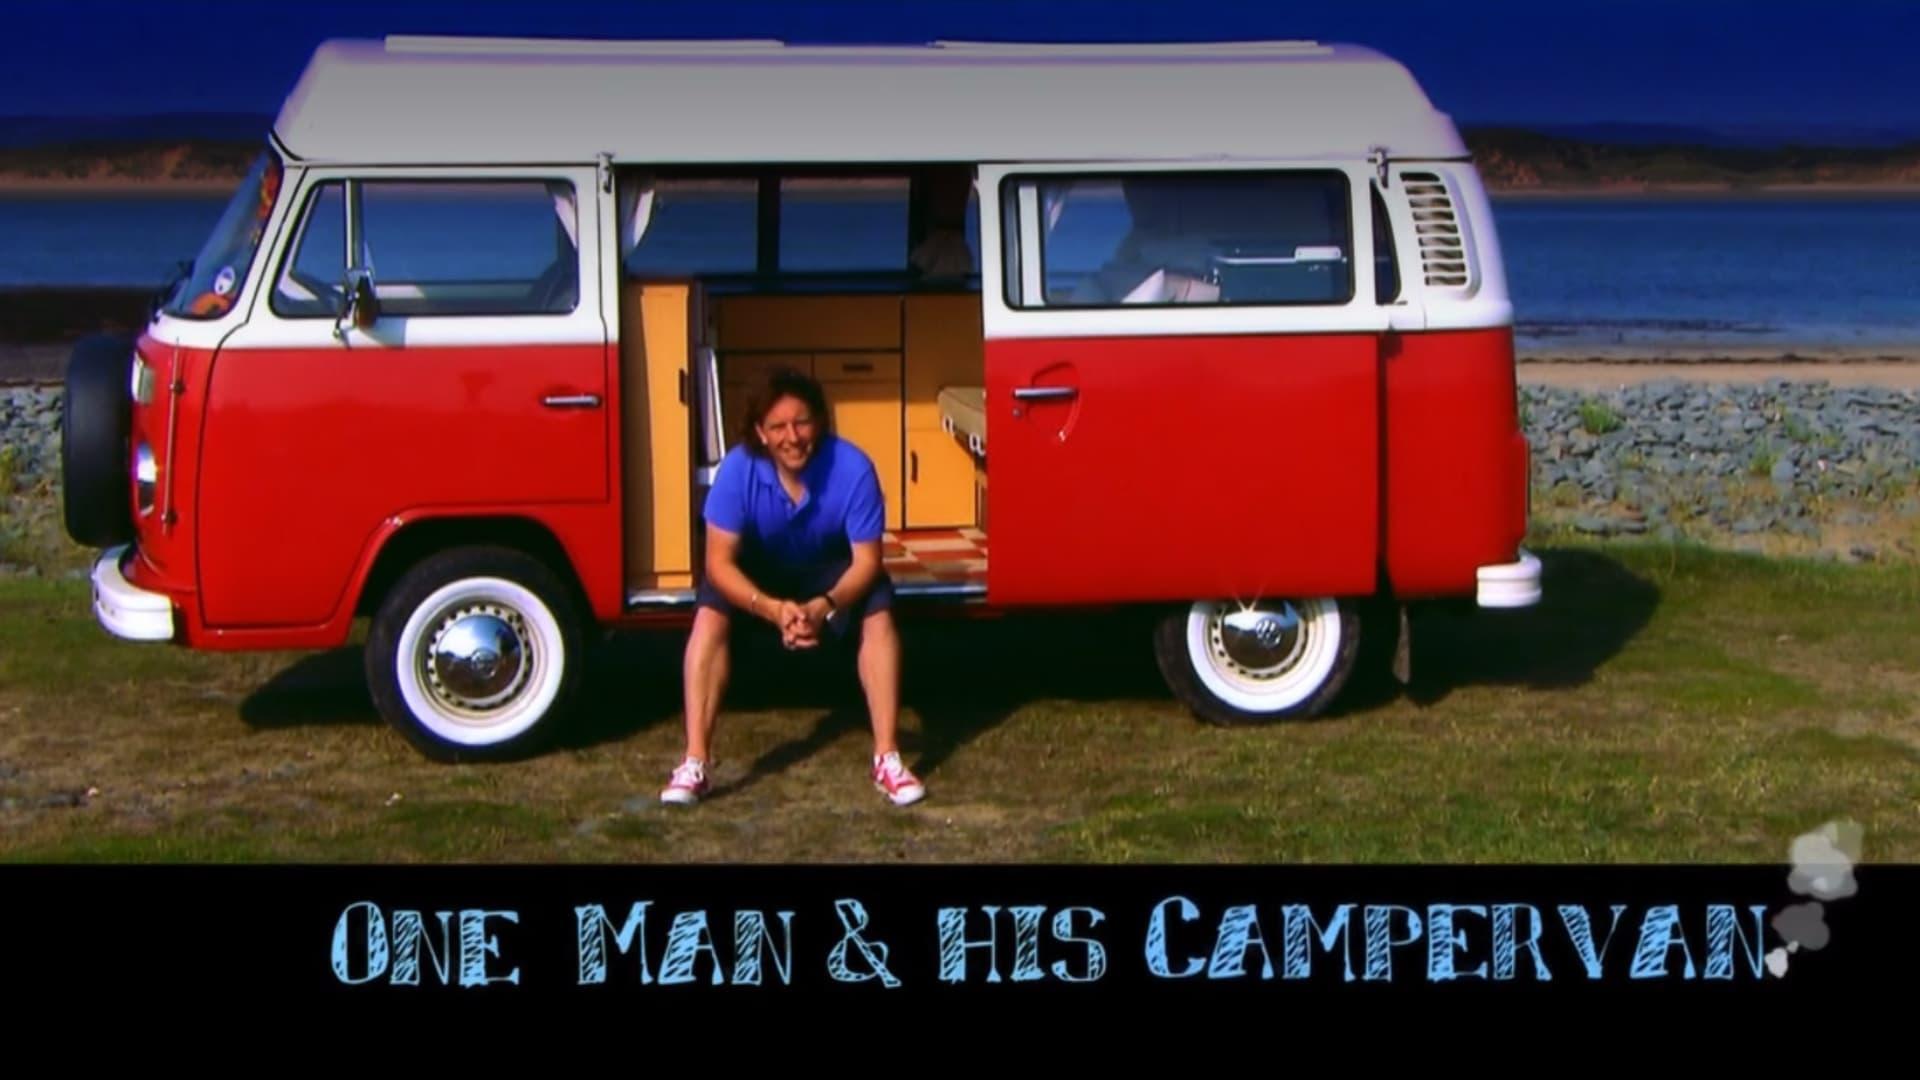 One Man and His Campervan backdrop